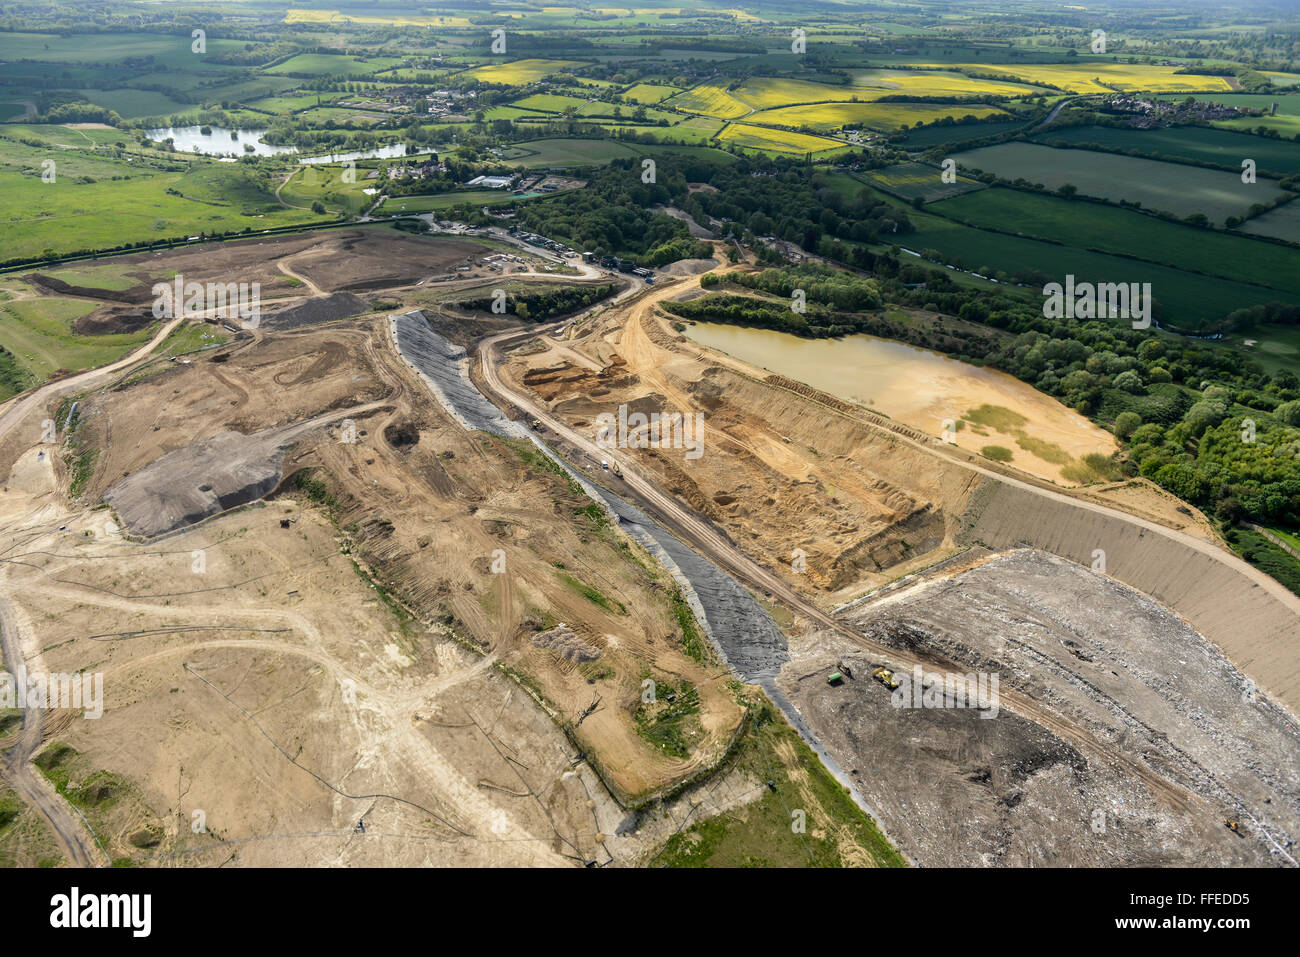 An aerial view of a landfill site in Hertfordshire, UK Stock Photo